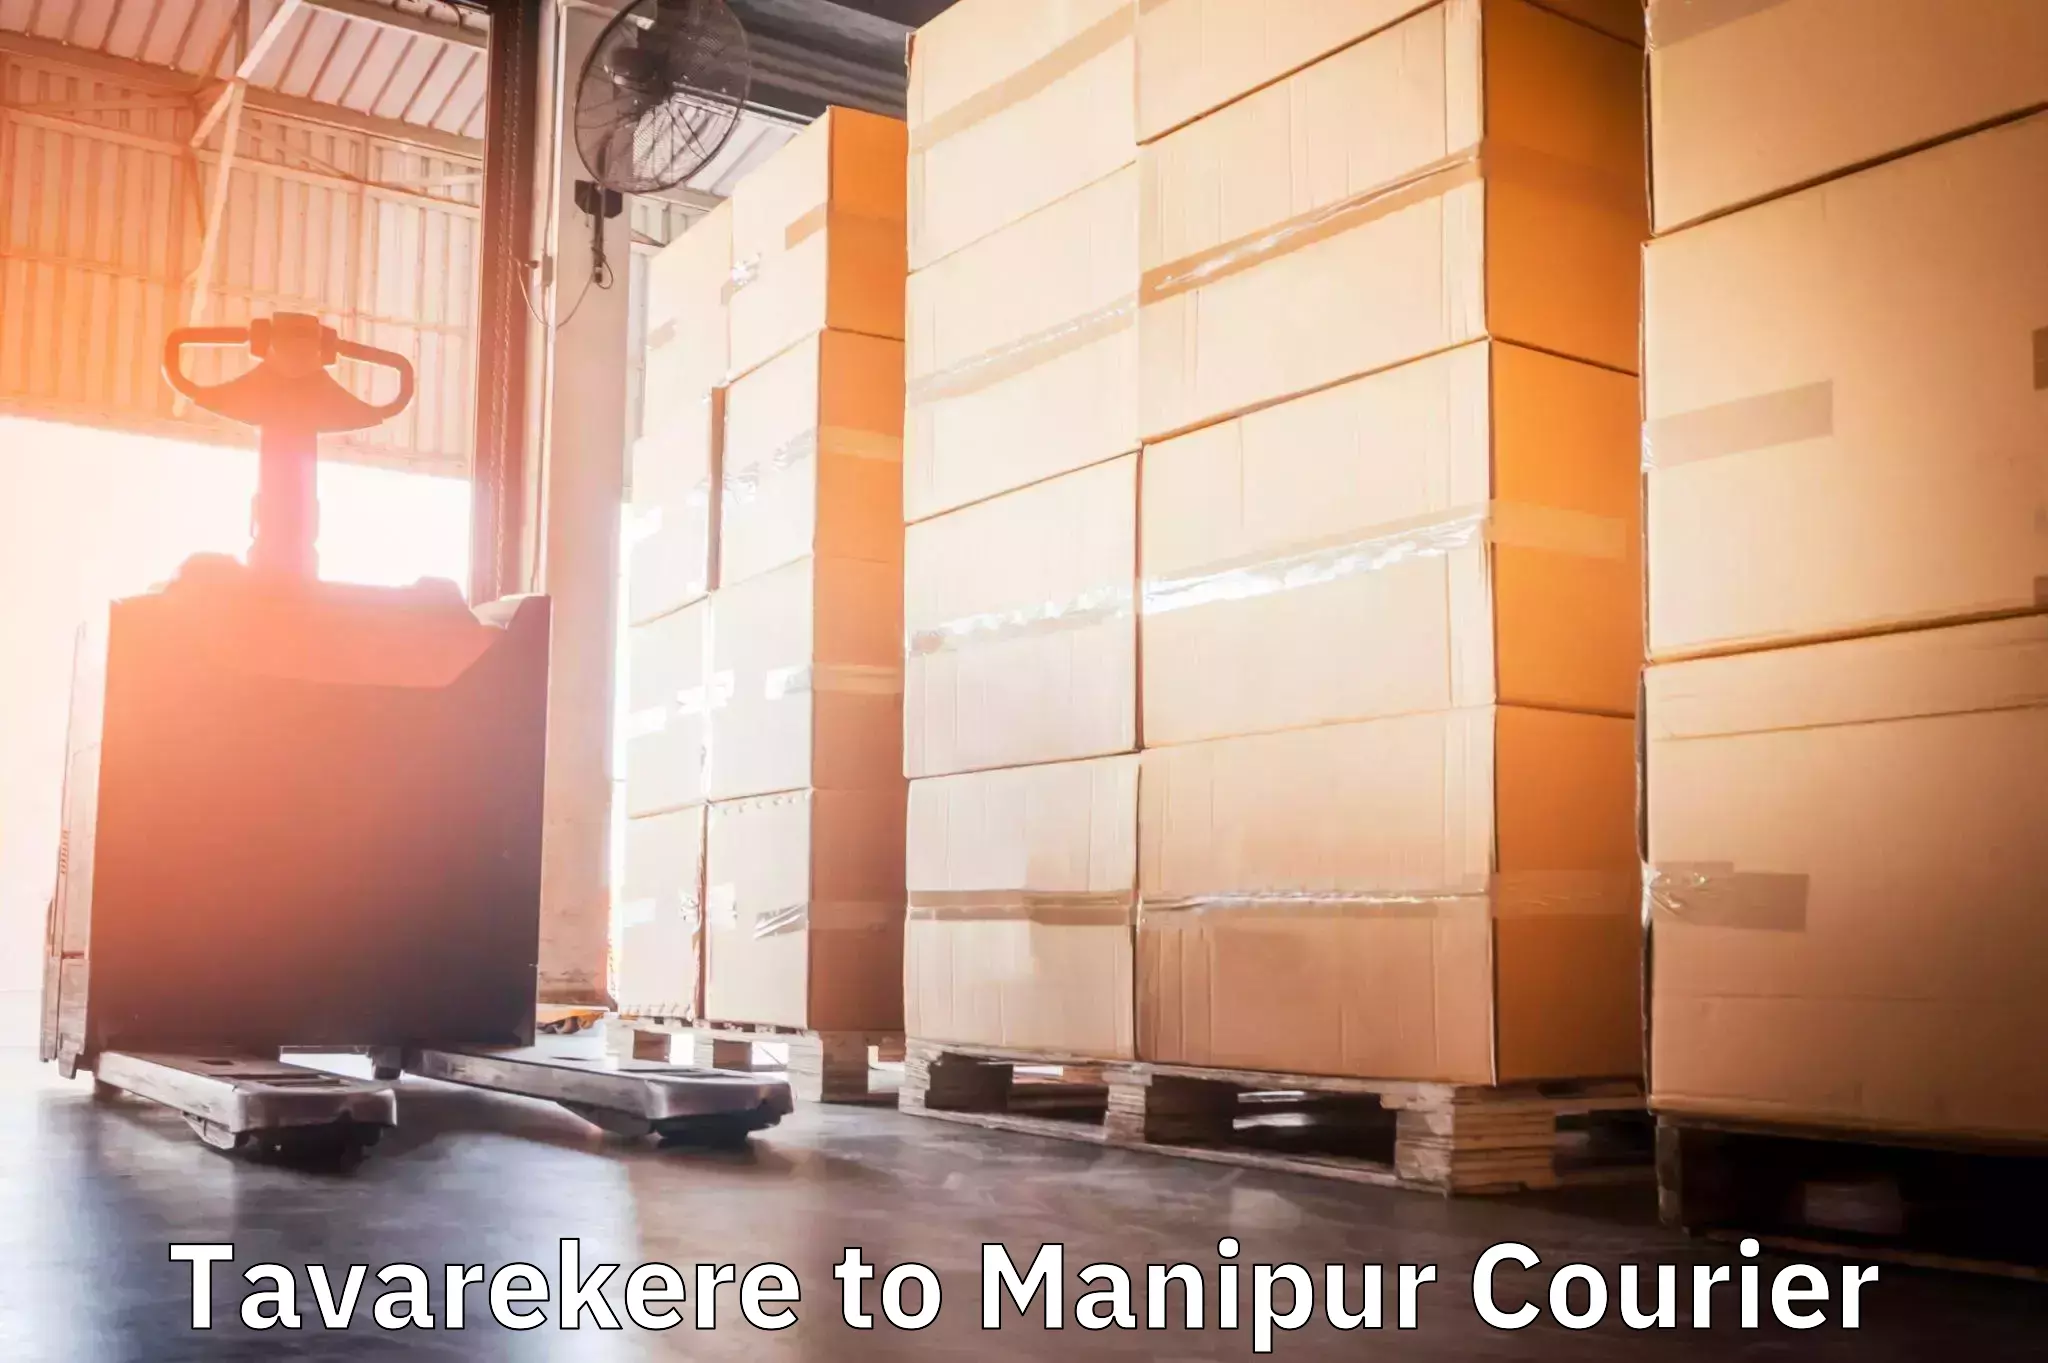 Local delivery service Tavarekere to Manipur